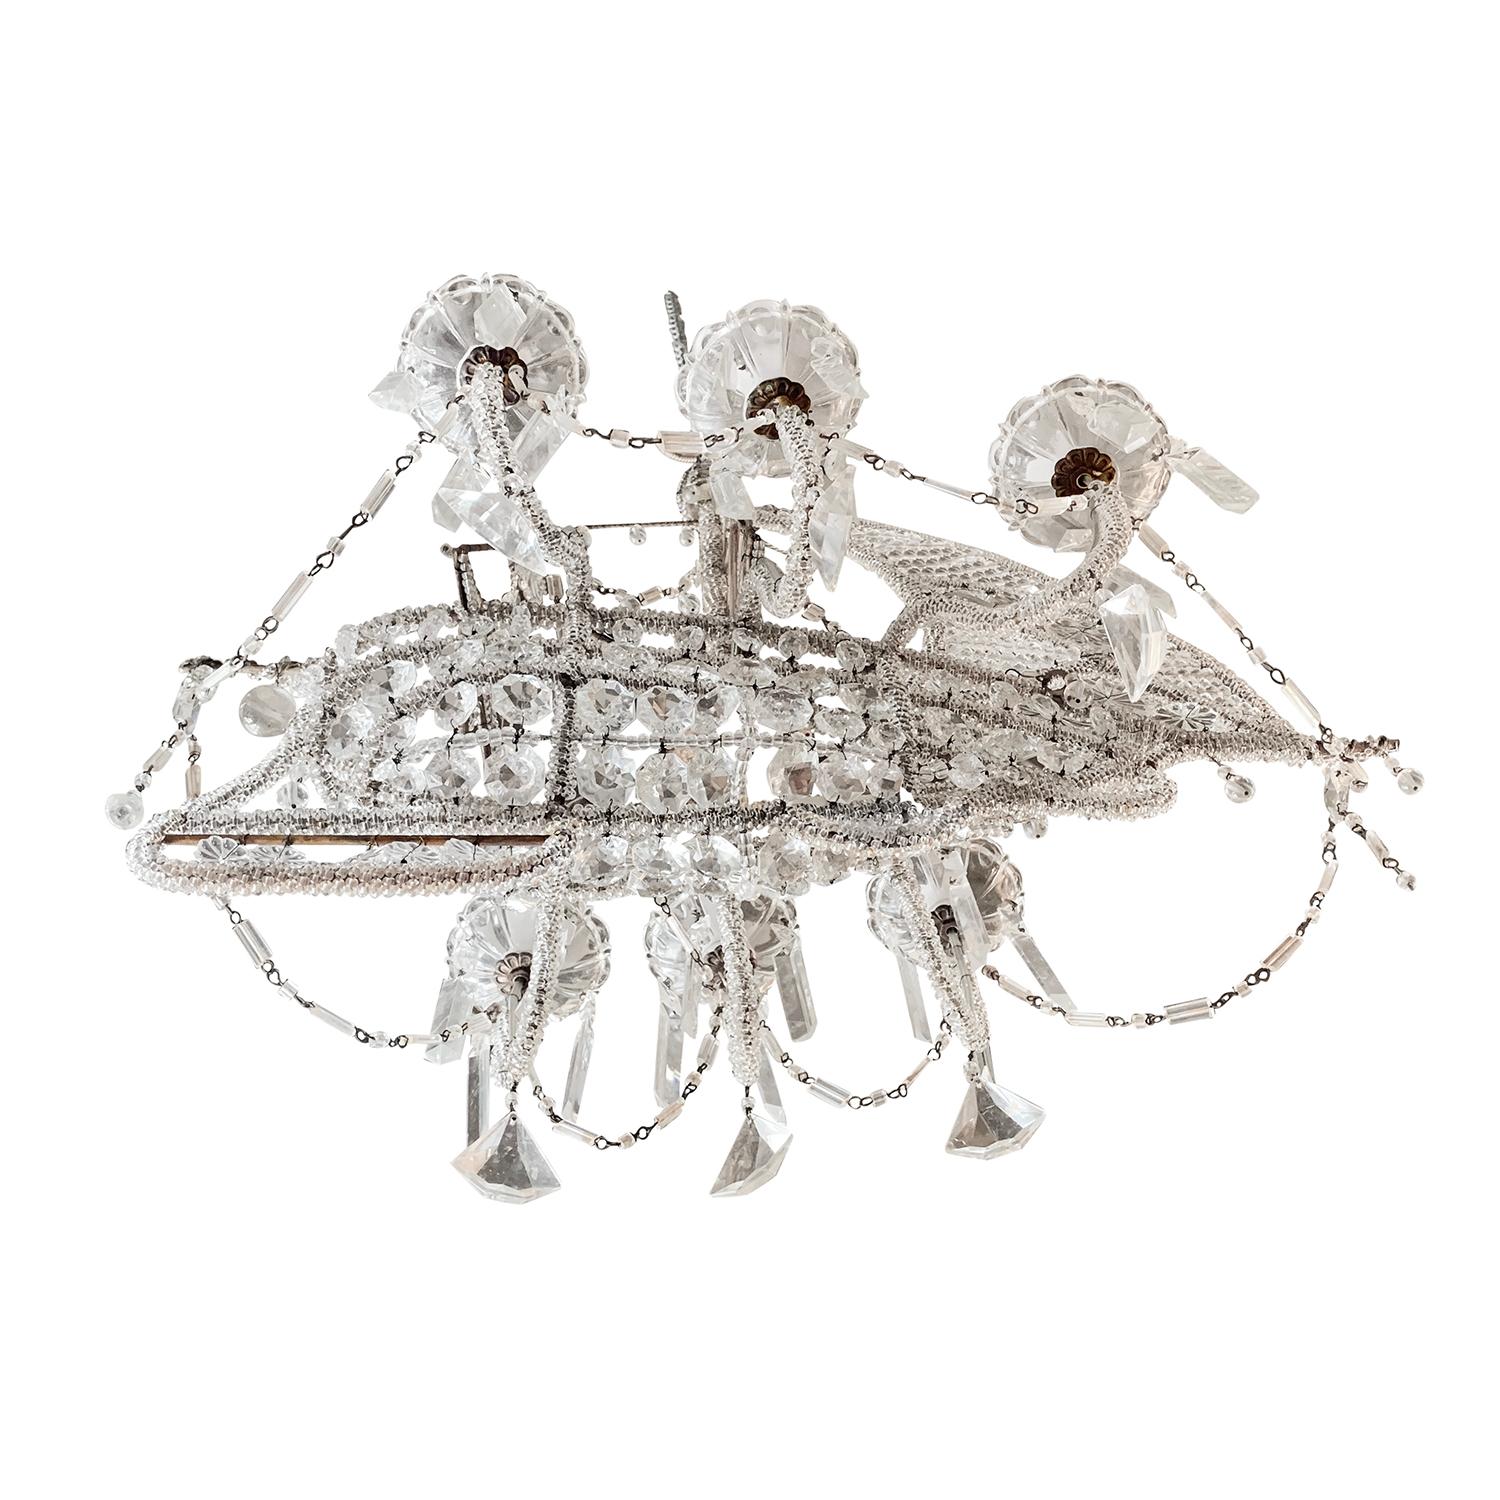 Art Deco 20th Century Crystal Beaded Ship Chandelier Attributed to the Maison Baguès